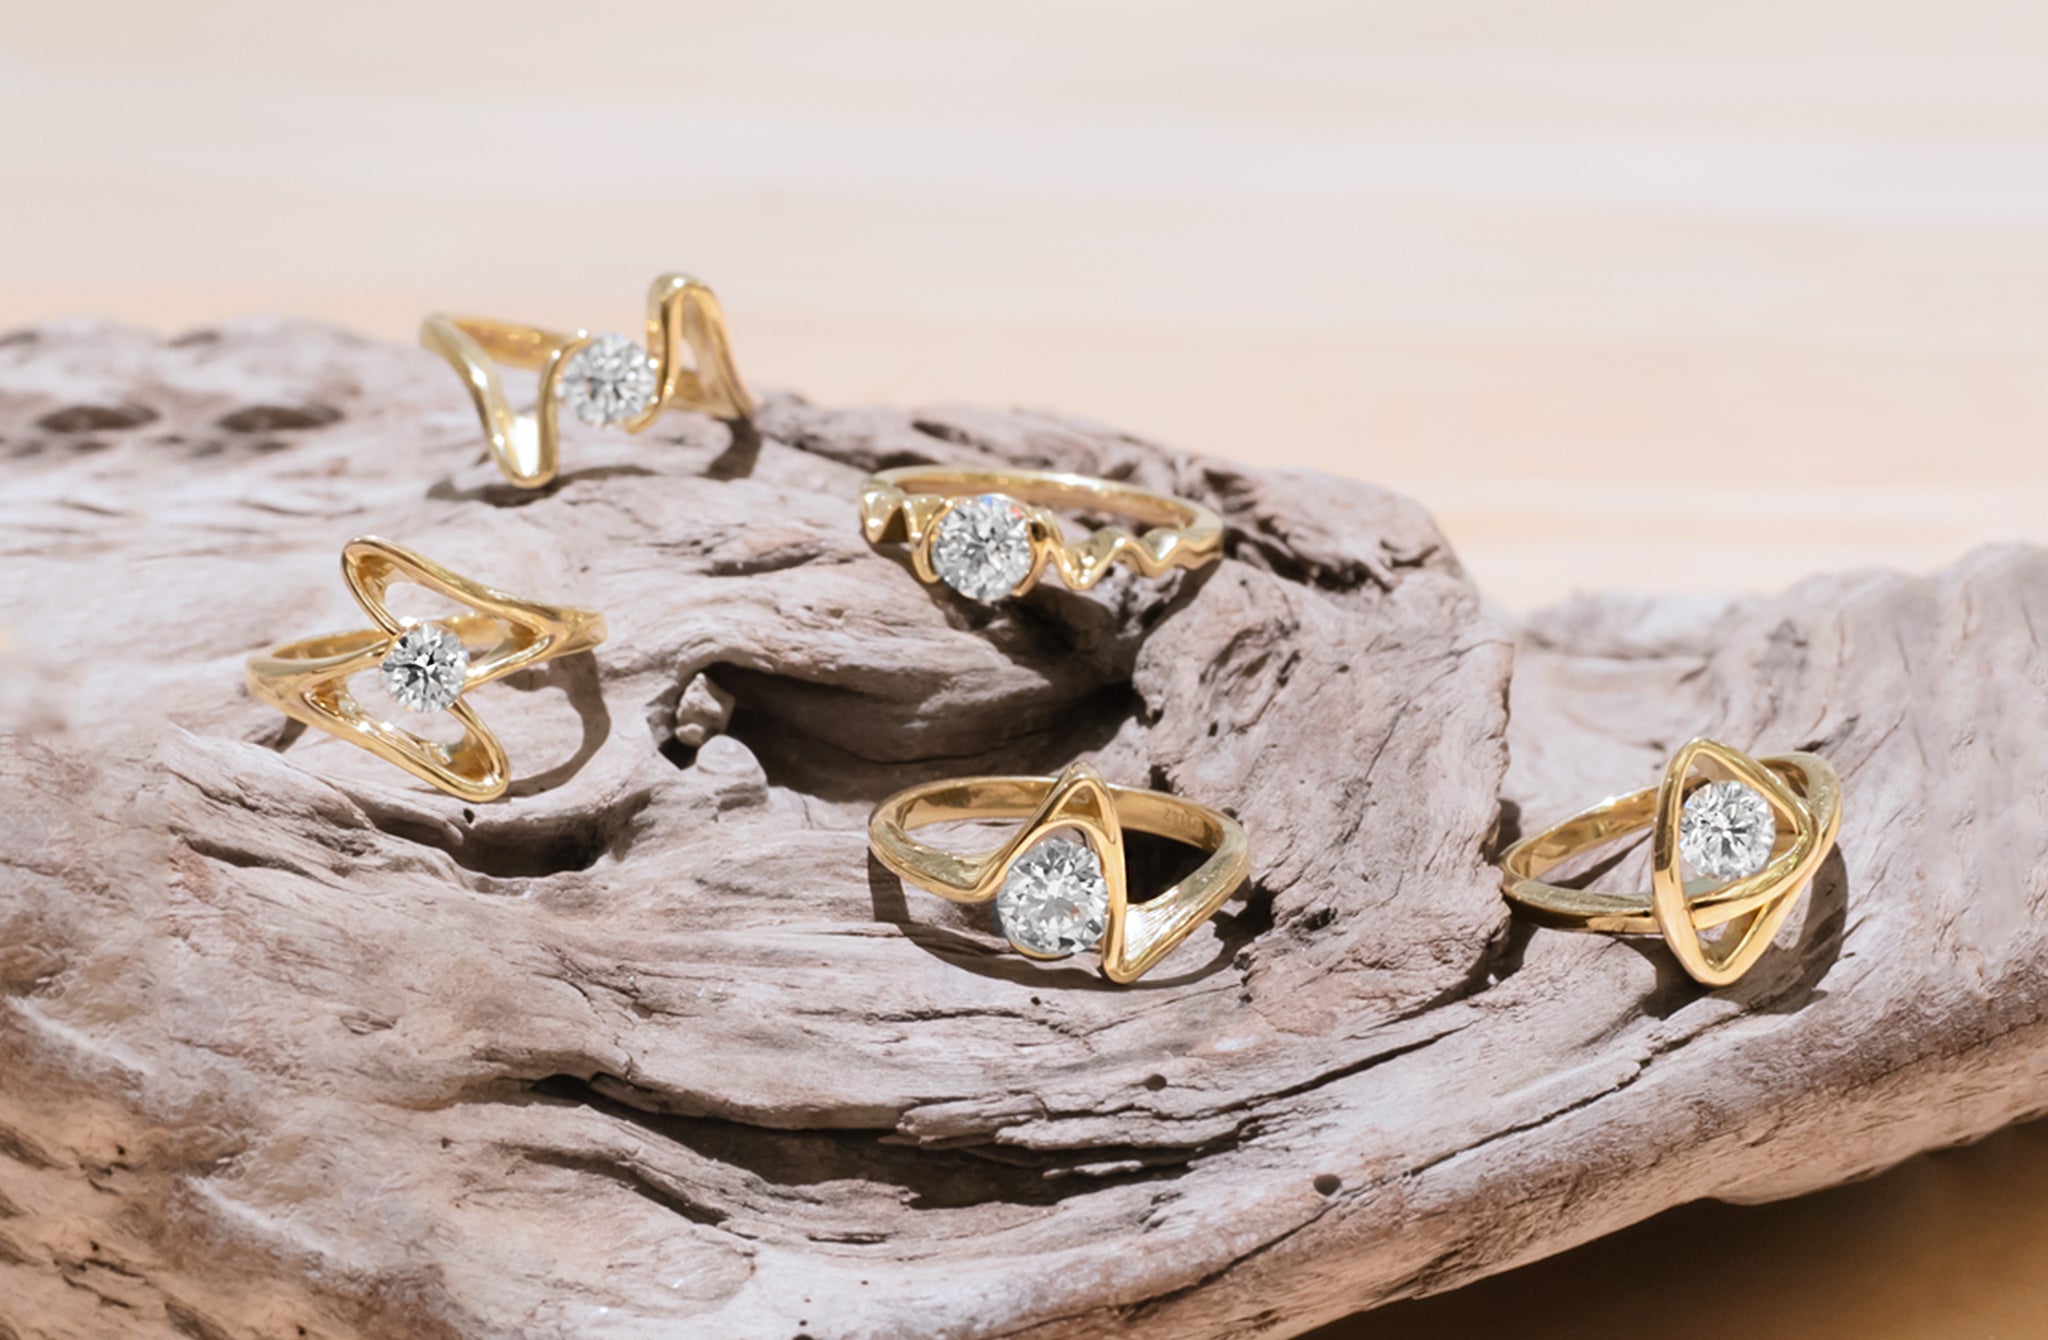 The Sandrift Collection: designer solitaire diamond rings crafted in 18ct yellow gold